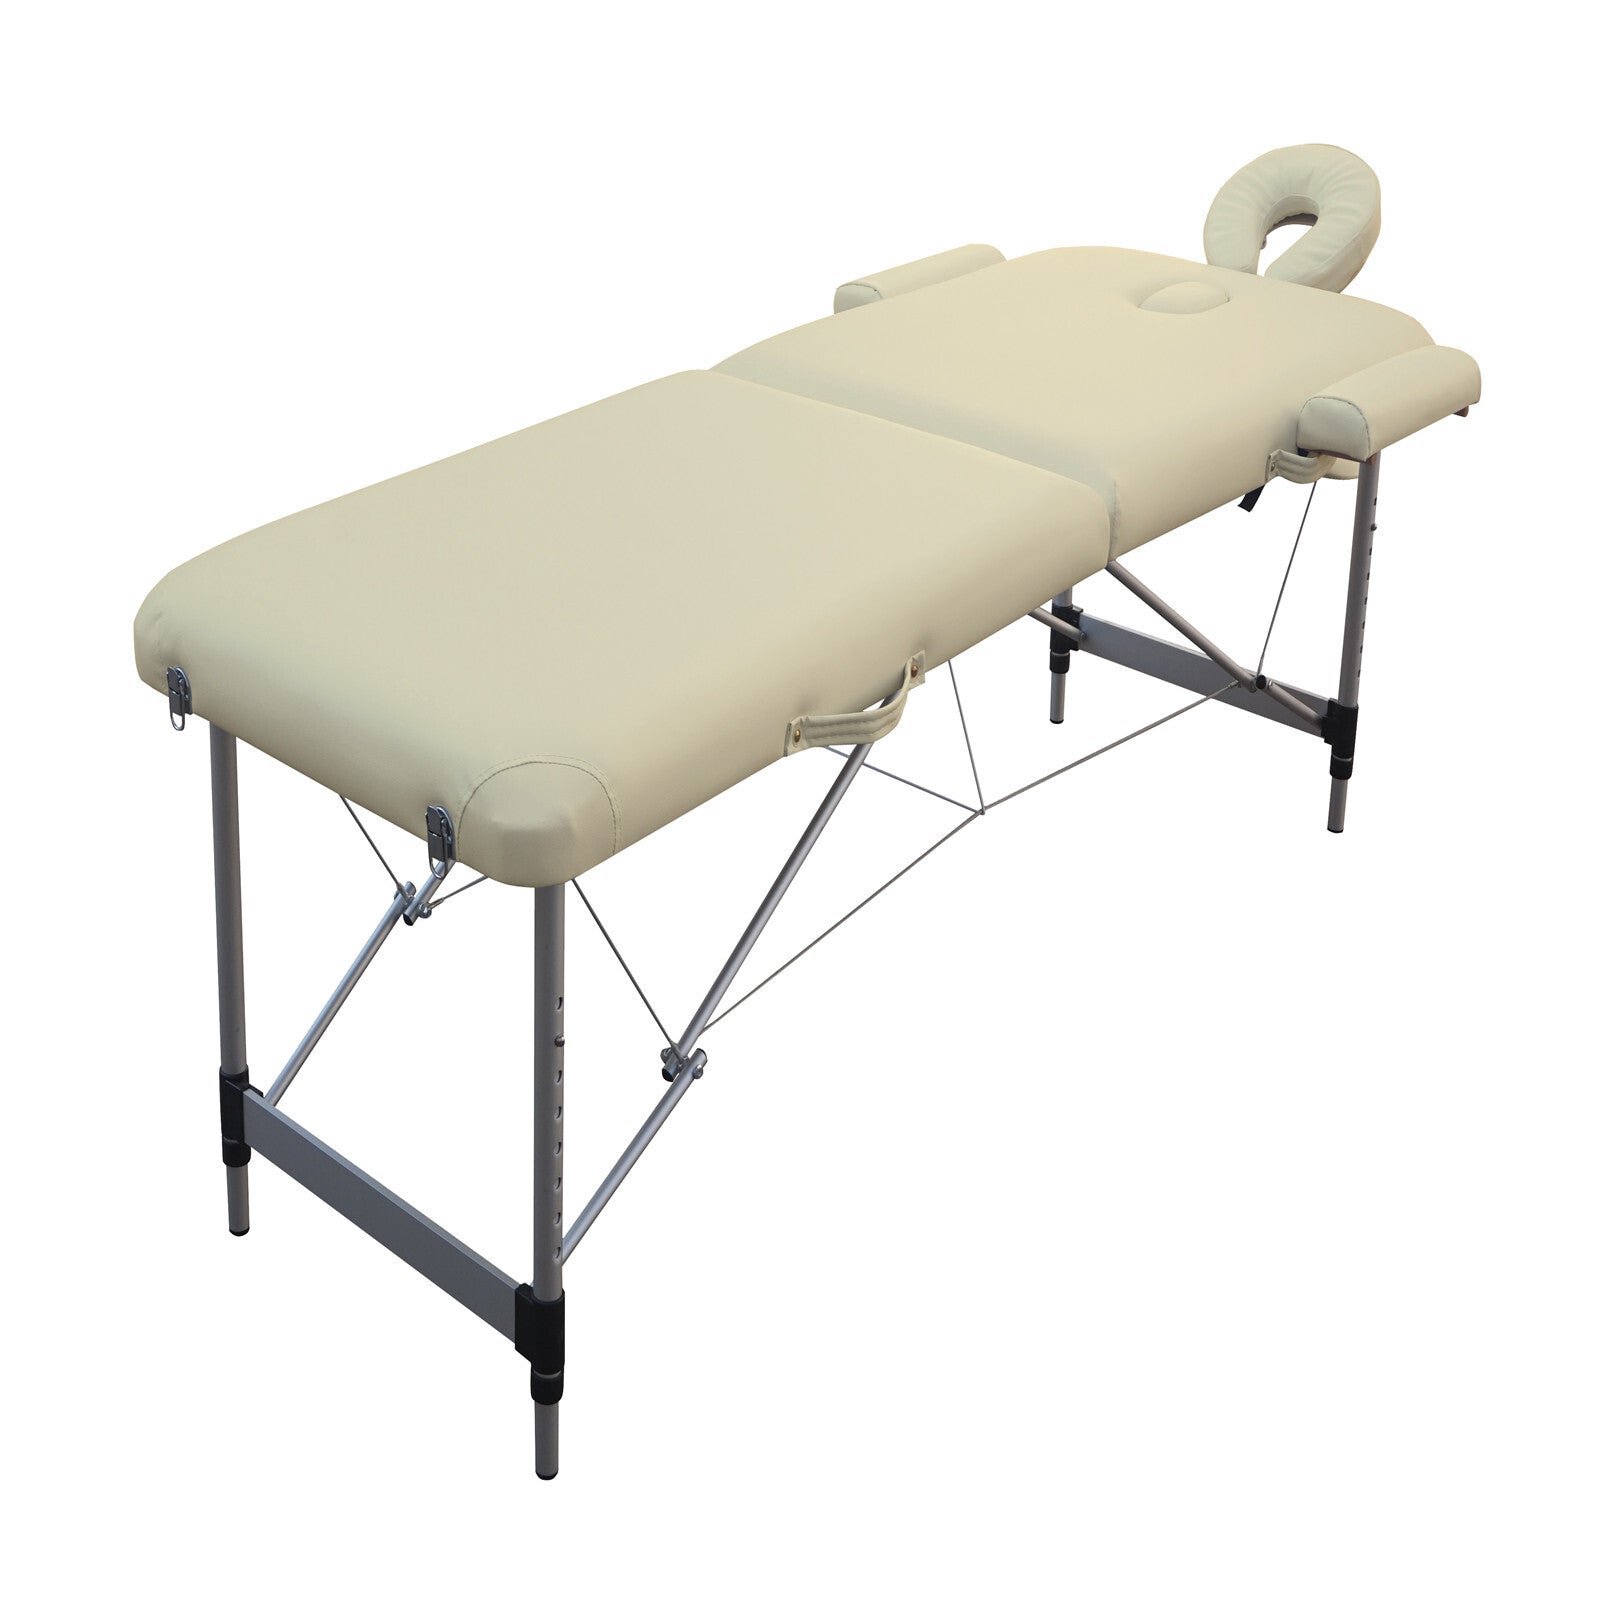 2 Fold Portable Aluminium Massage Table Massage Bed Beauty Therapy Beige - SILBERSHELL